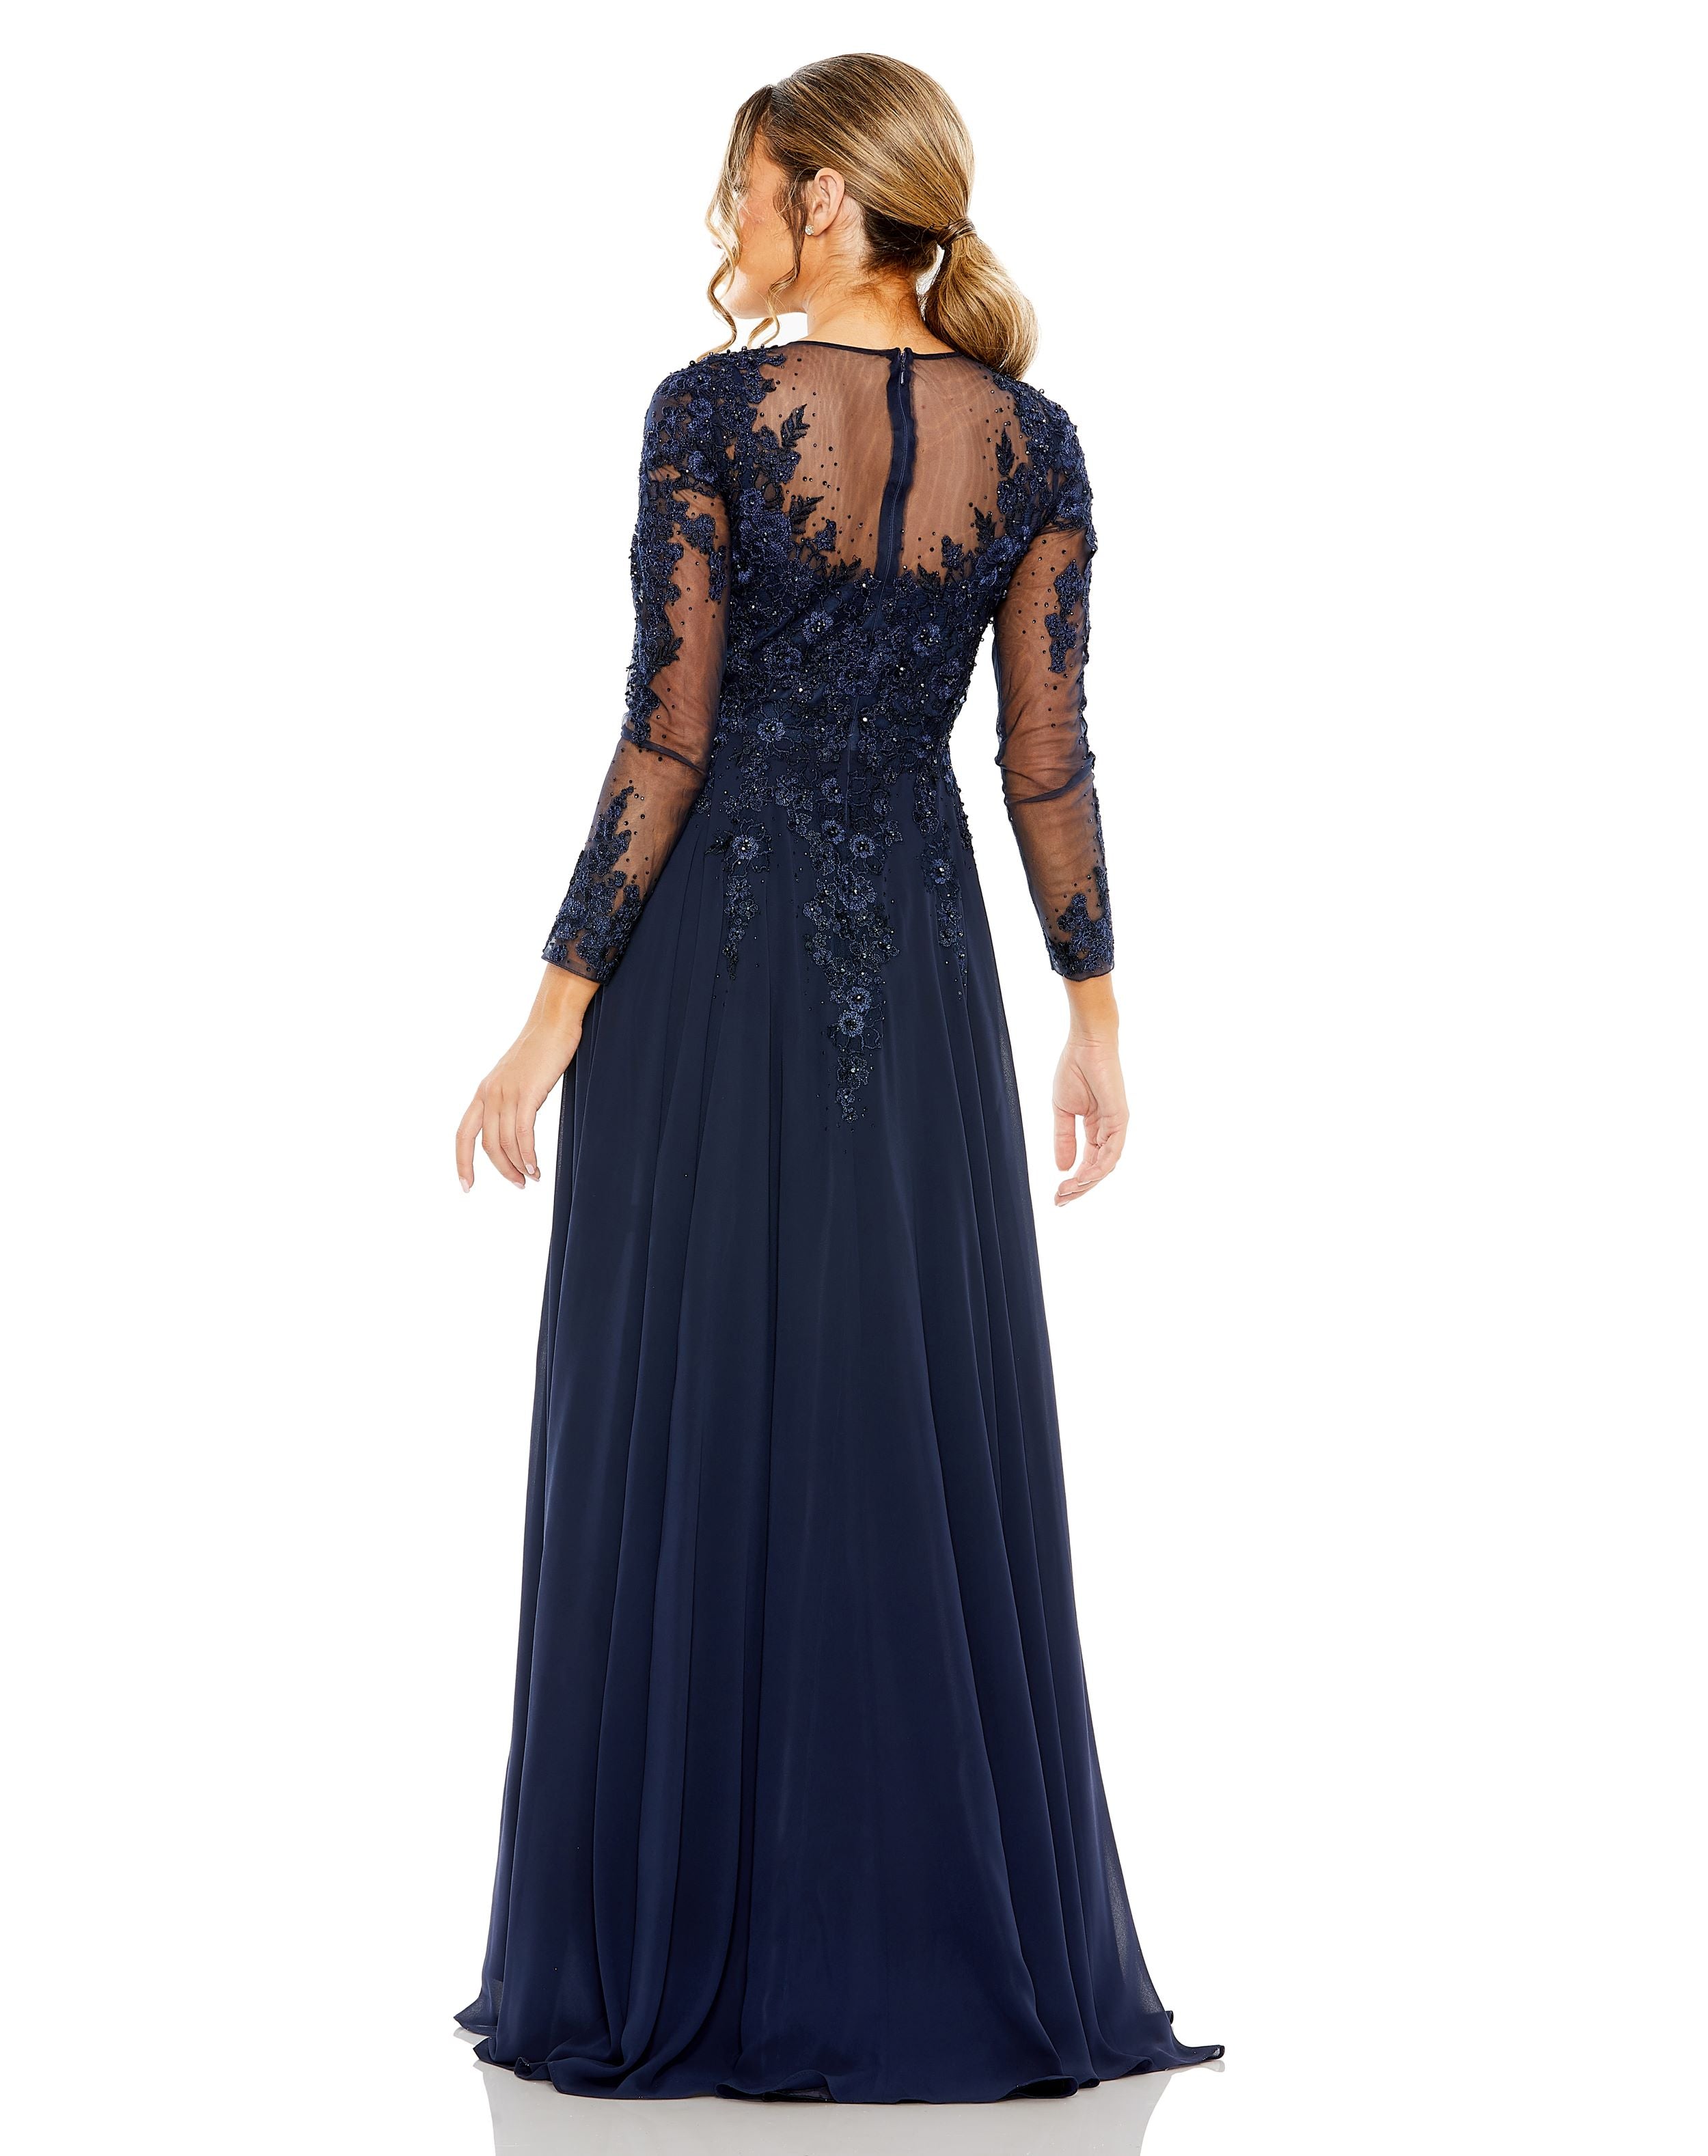 High Neck Mesh Long Sleeve Embellished A Line Gown